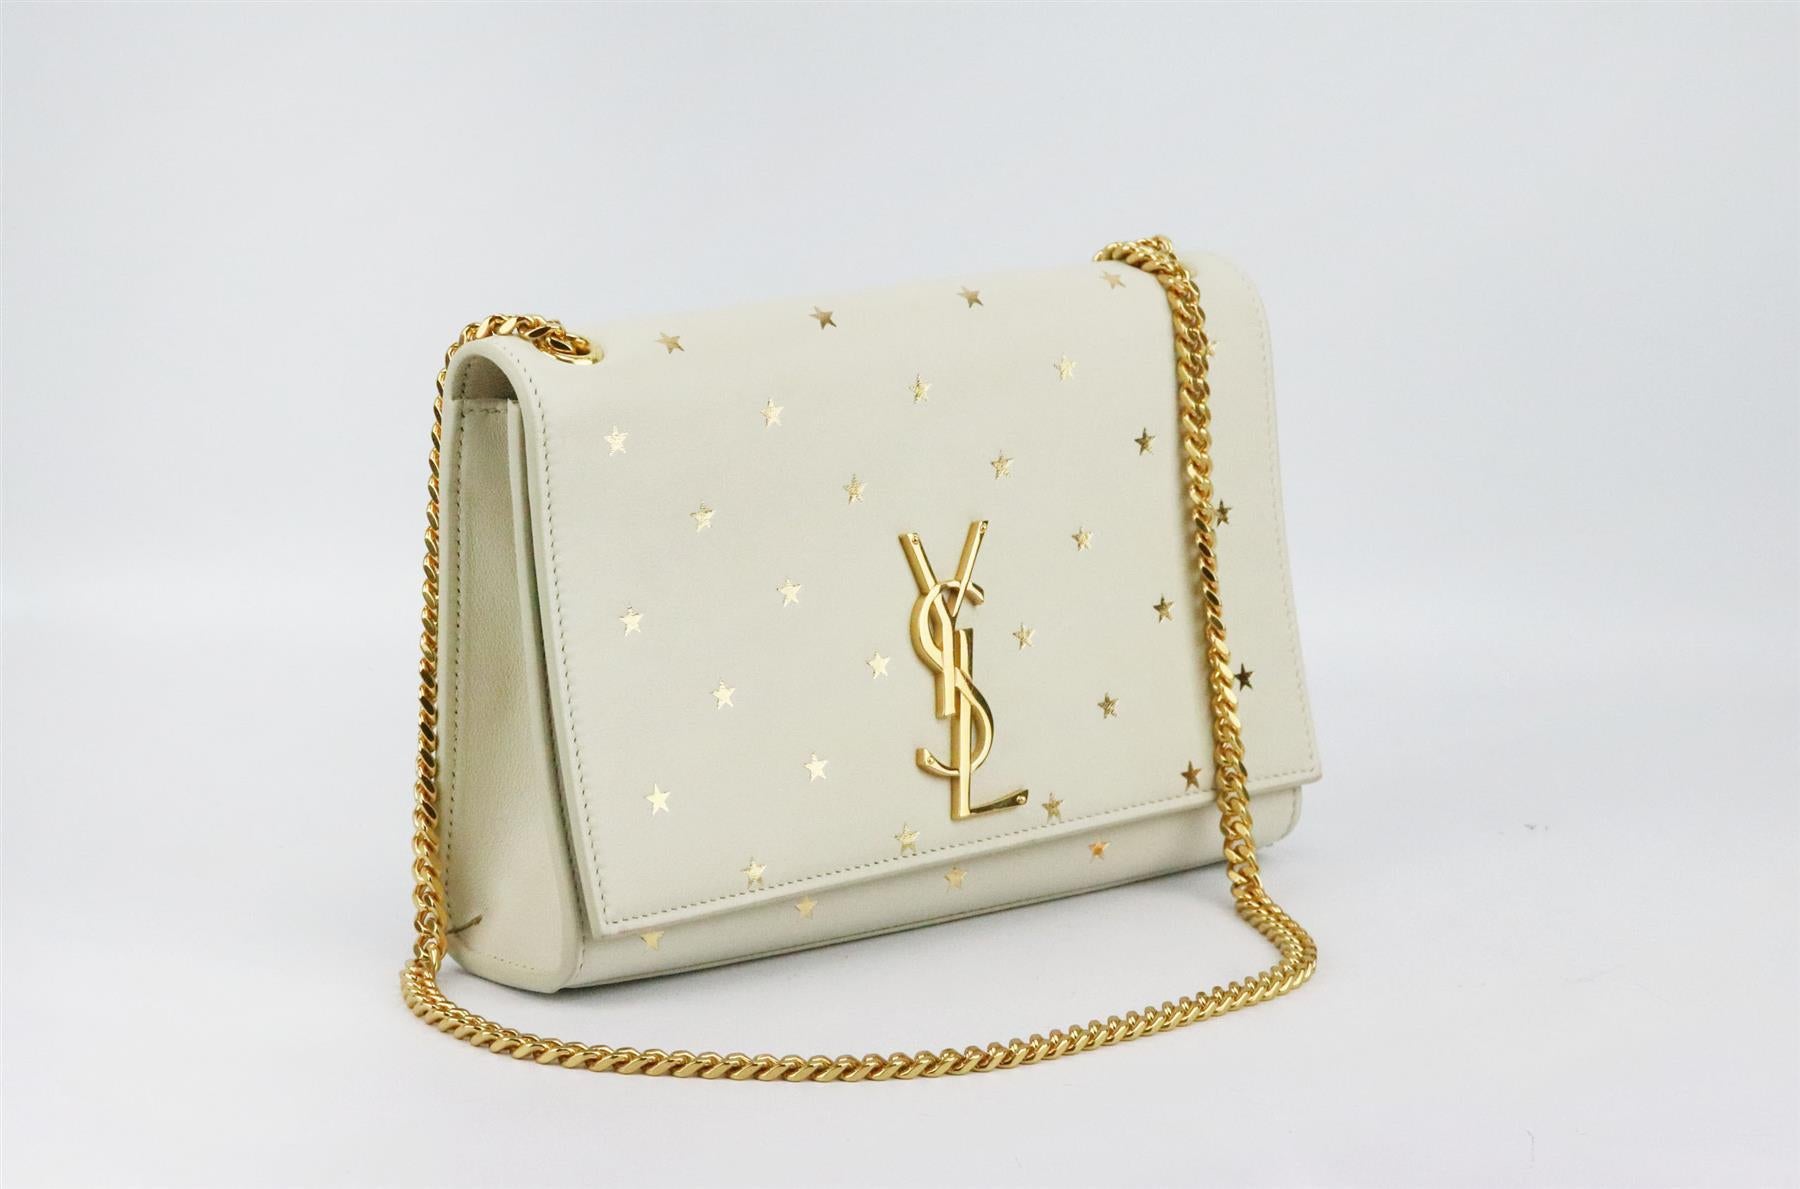 This 'Kate Monogramme' bag by SAINT LAURENT will suit almost any occasion, embellished with the signature 'YSL' plaque, it's been crafted in Italy from soft star-printed leather and has a durable chain strap that can be adjusted for a shorter drop.